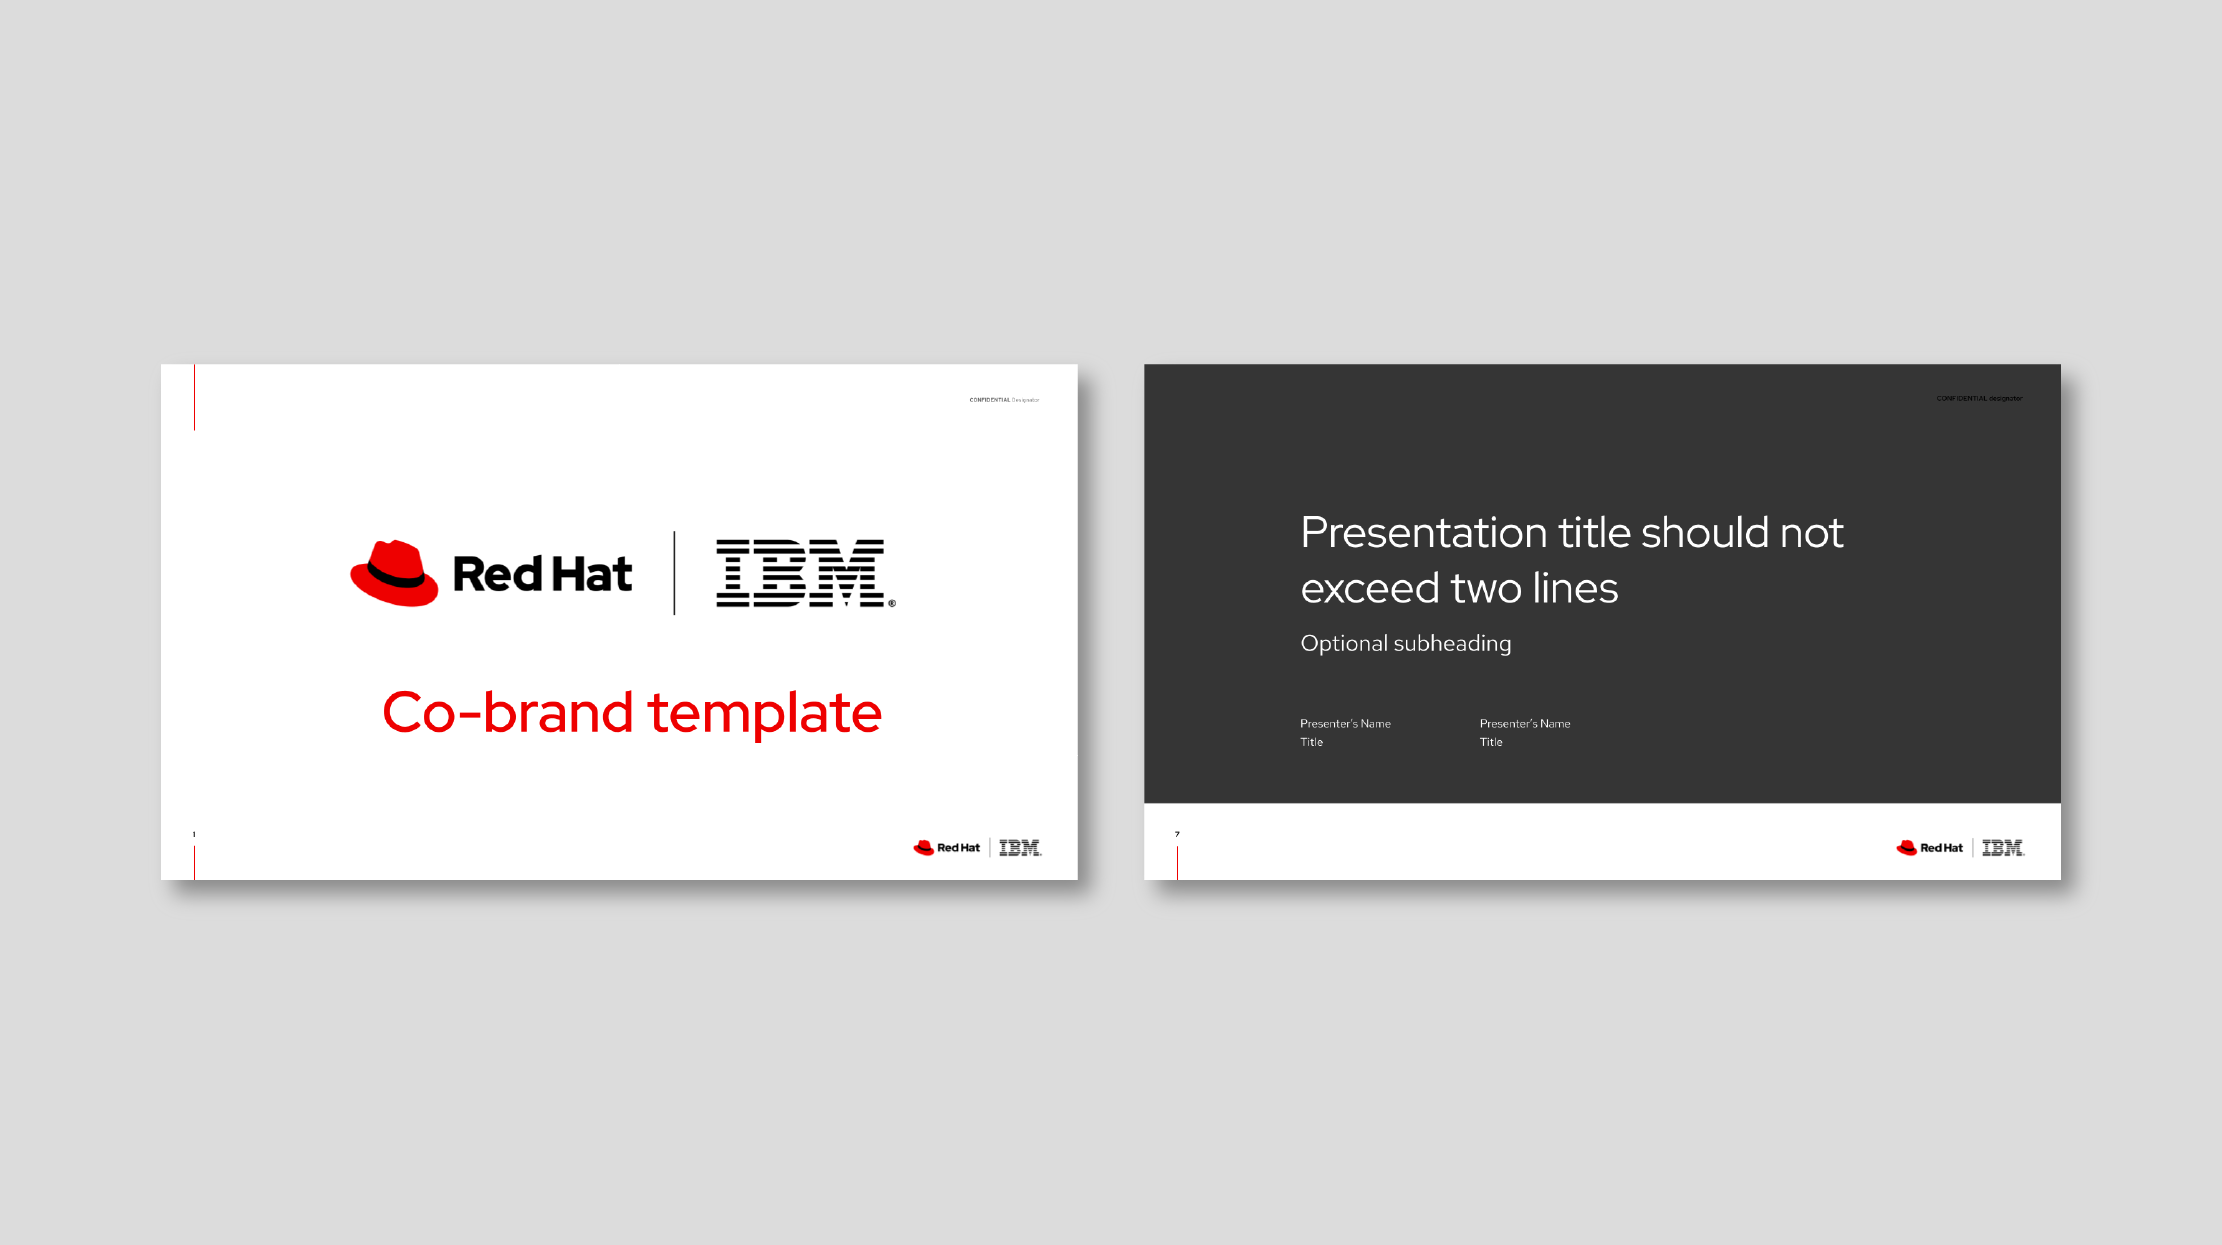 Red Hat and IBM co-branded presentation template.